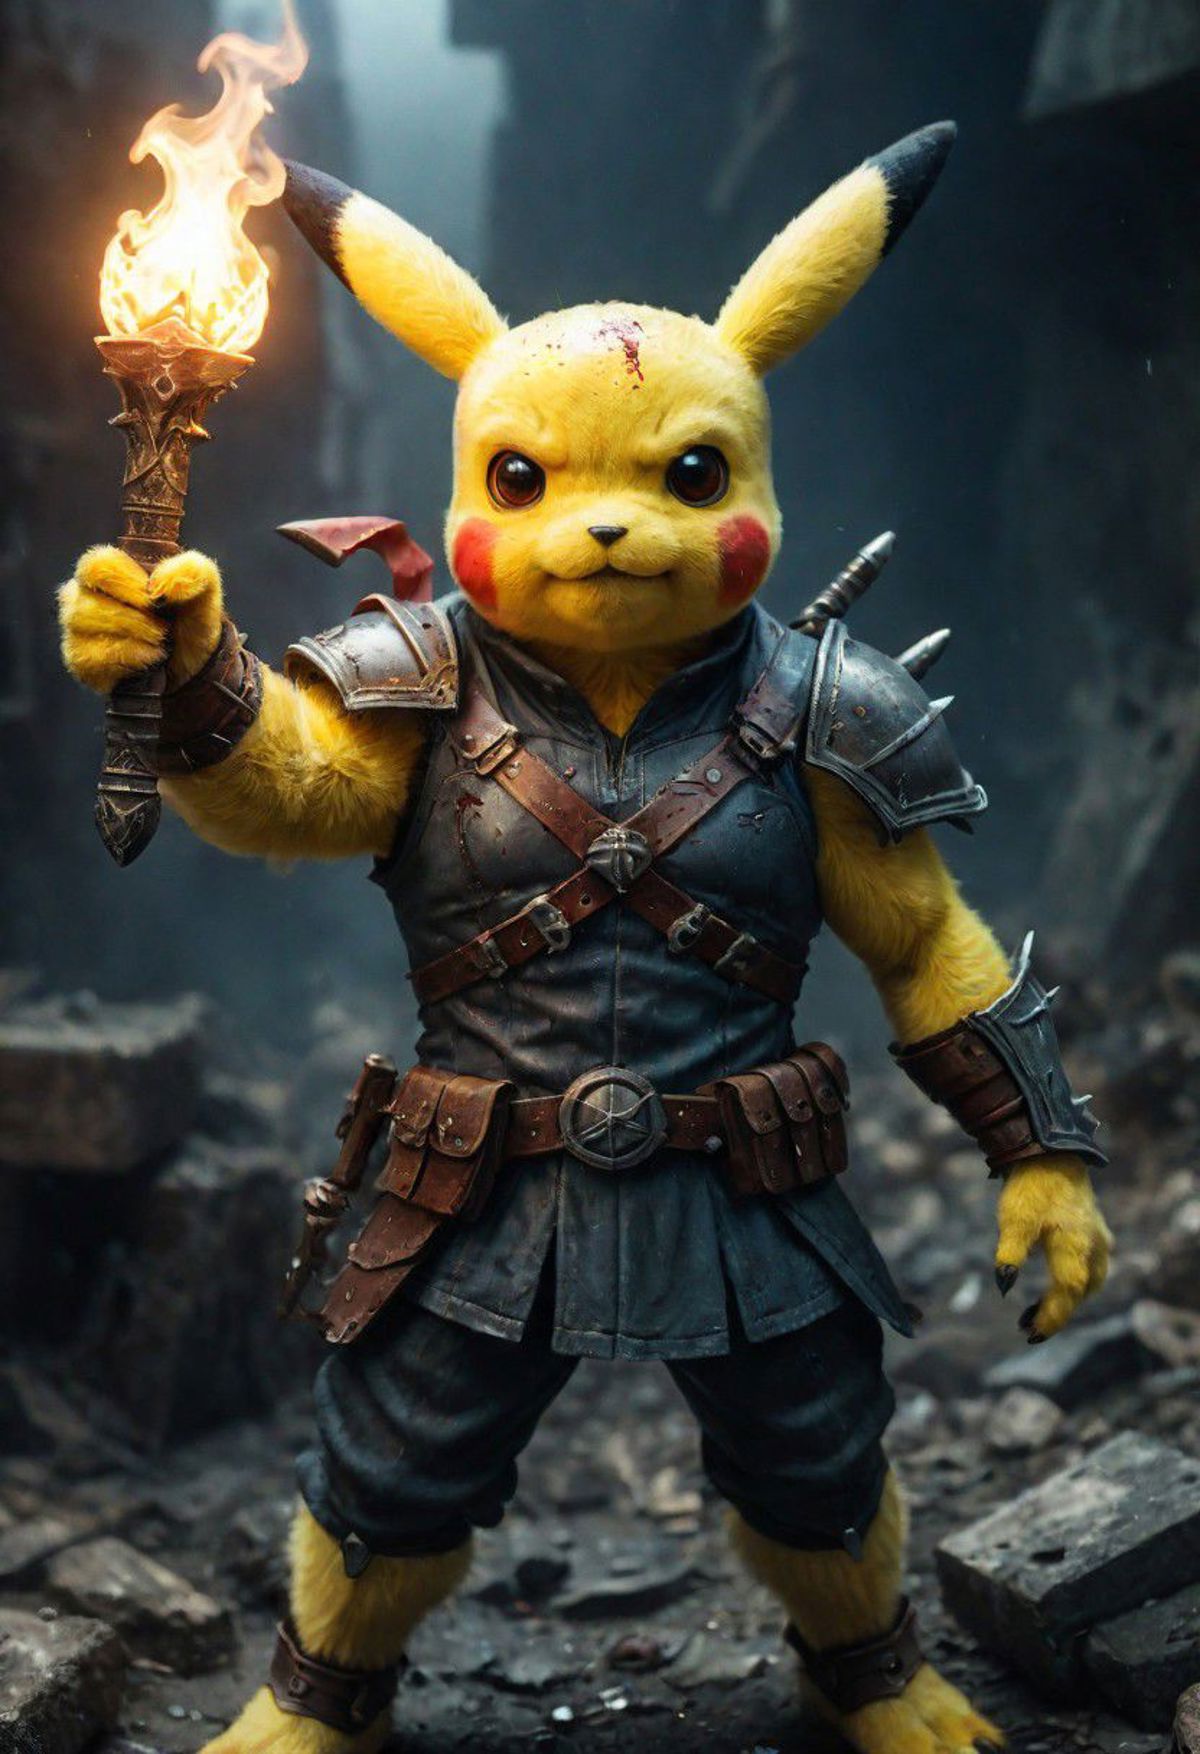 A Pikachu cosplay wearing a knight's outfit and holding a sword.